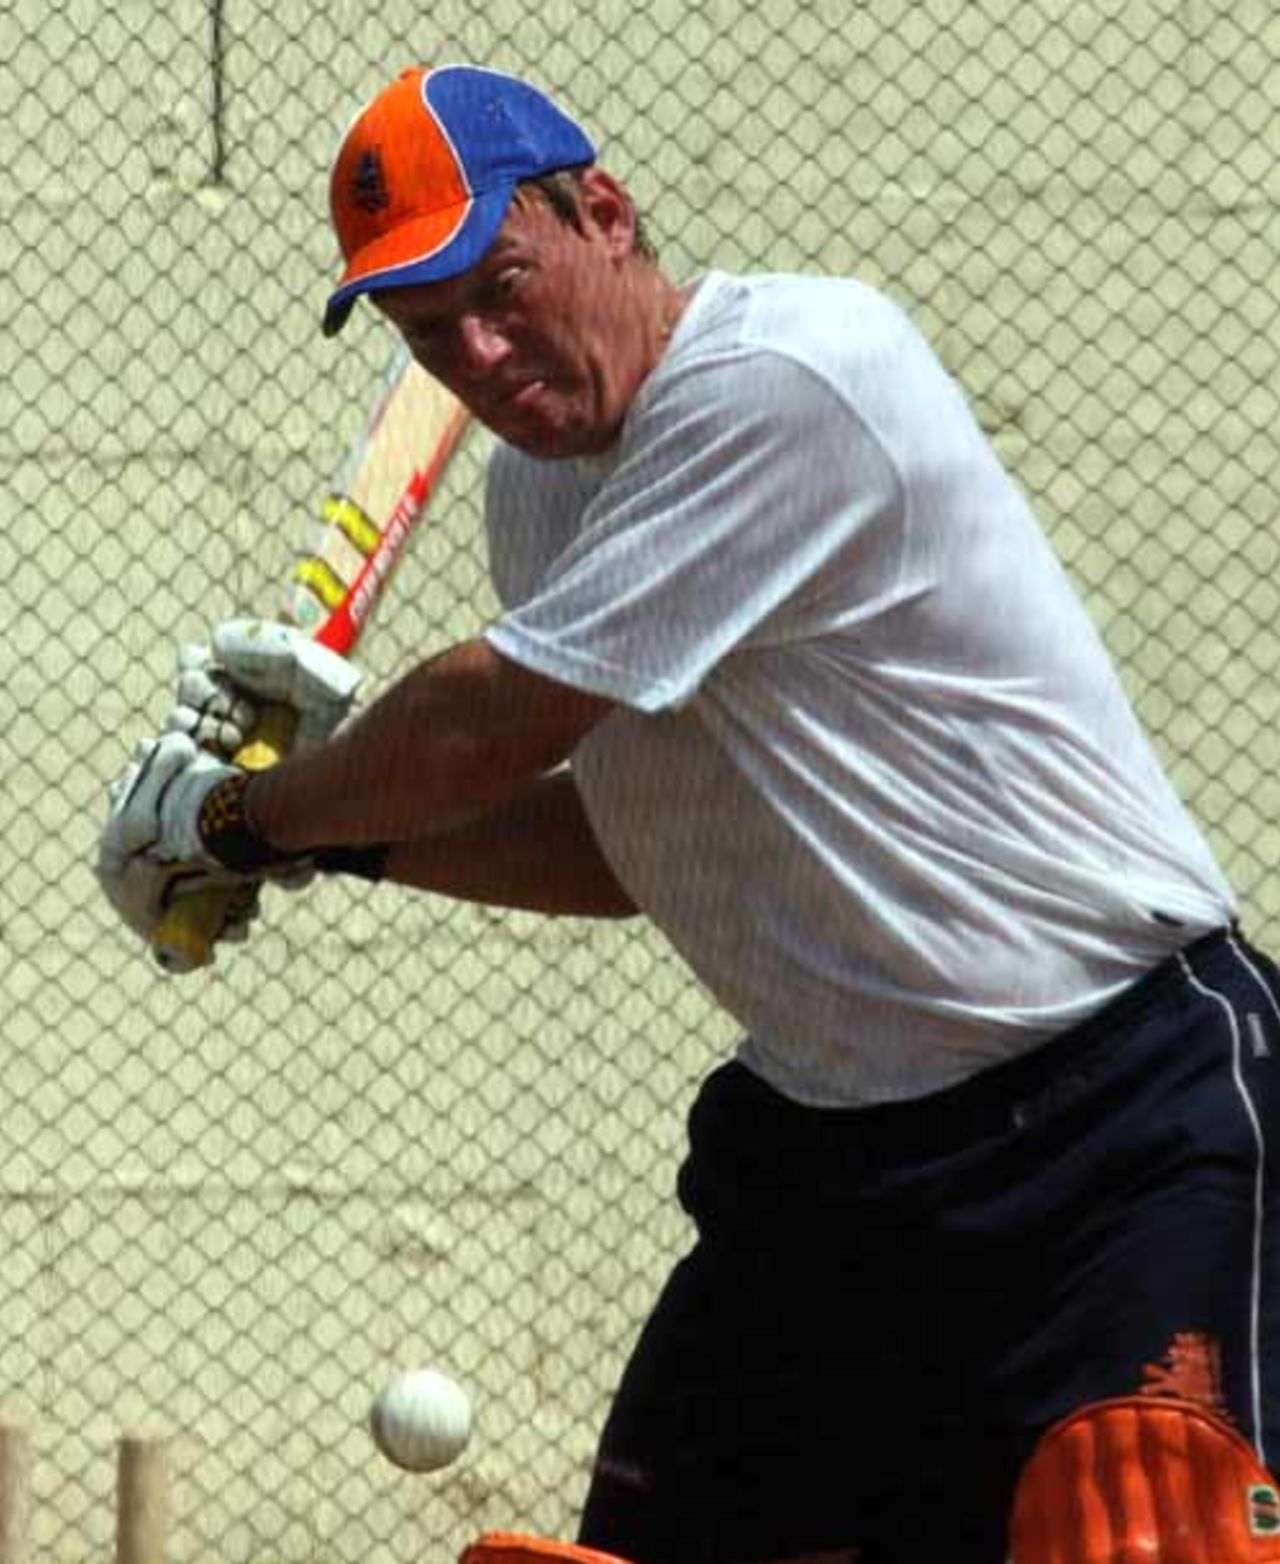 Tim de Leede, the Netherlands middle-order batsman, watches the ball at the Warner Park nets, St Kitts, March 17, 2007